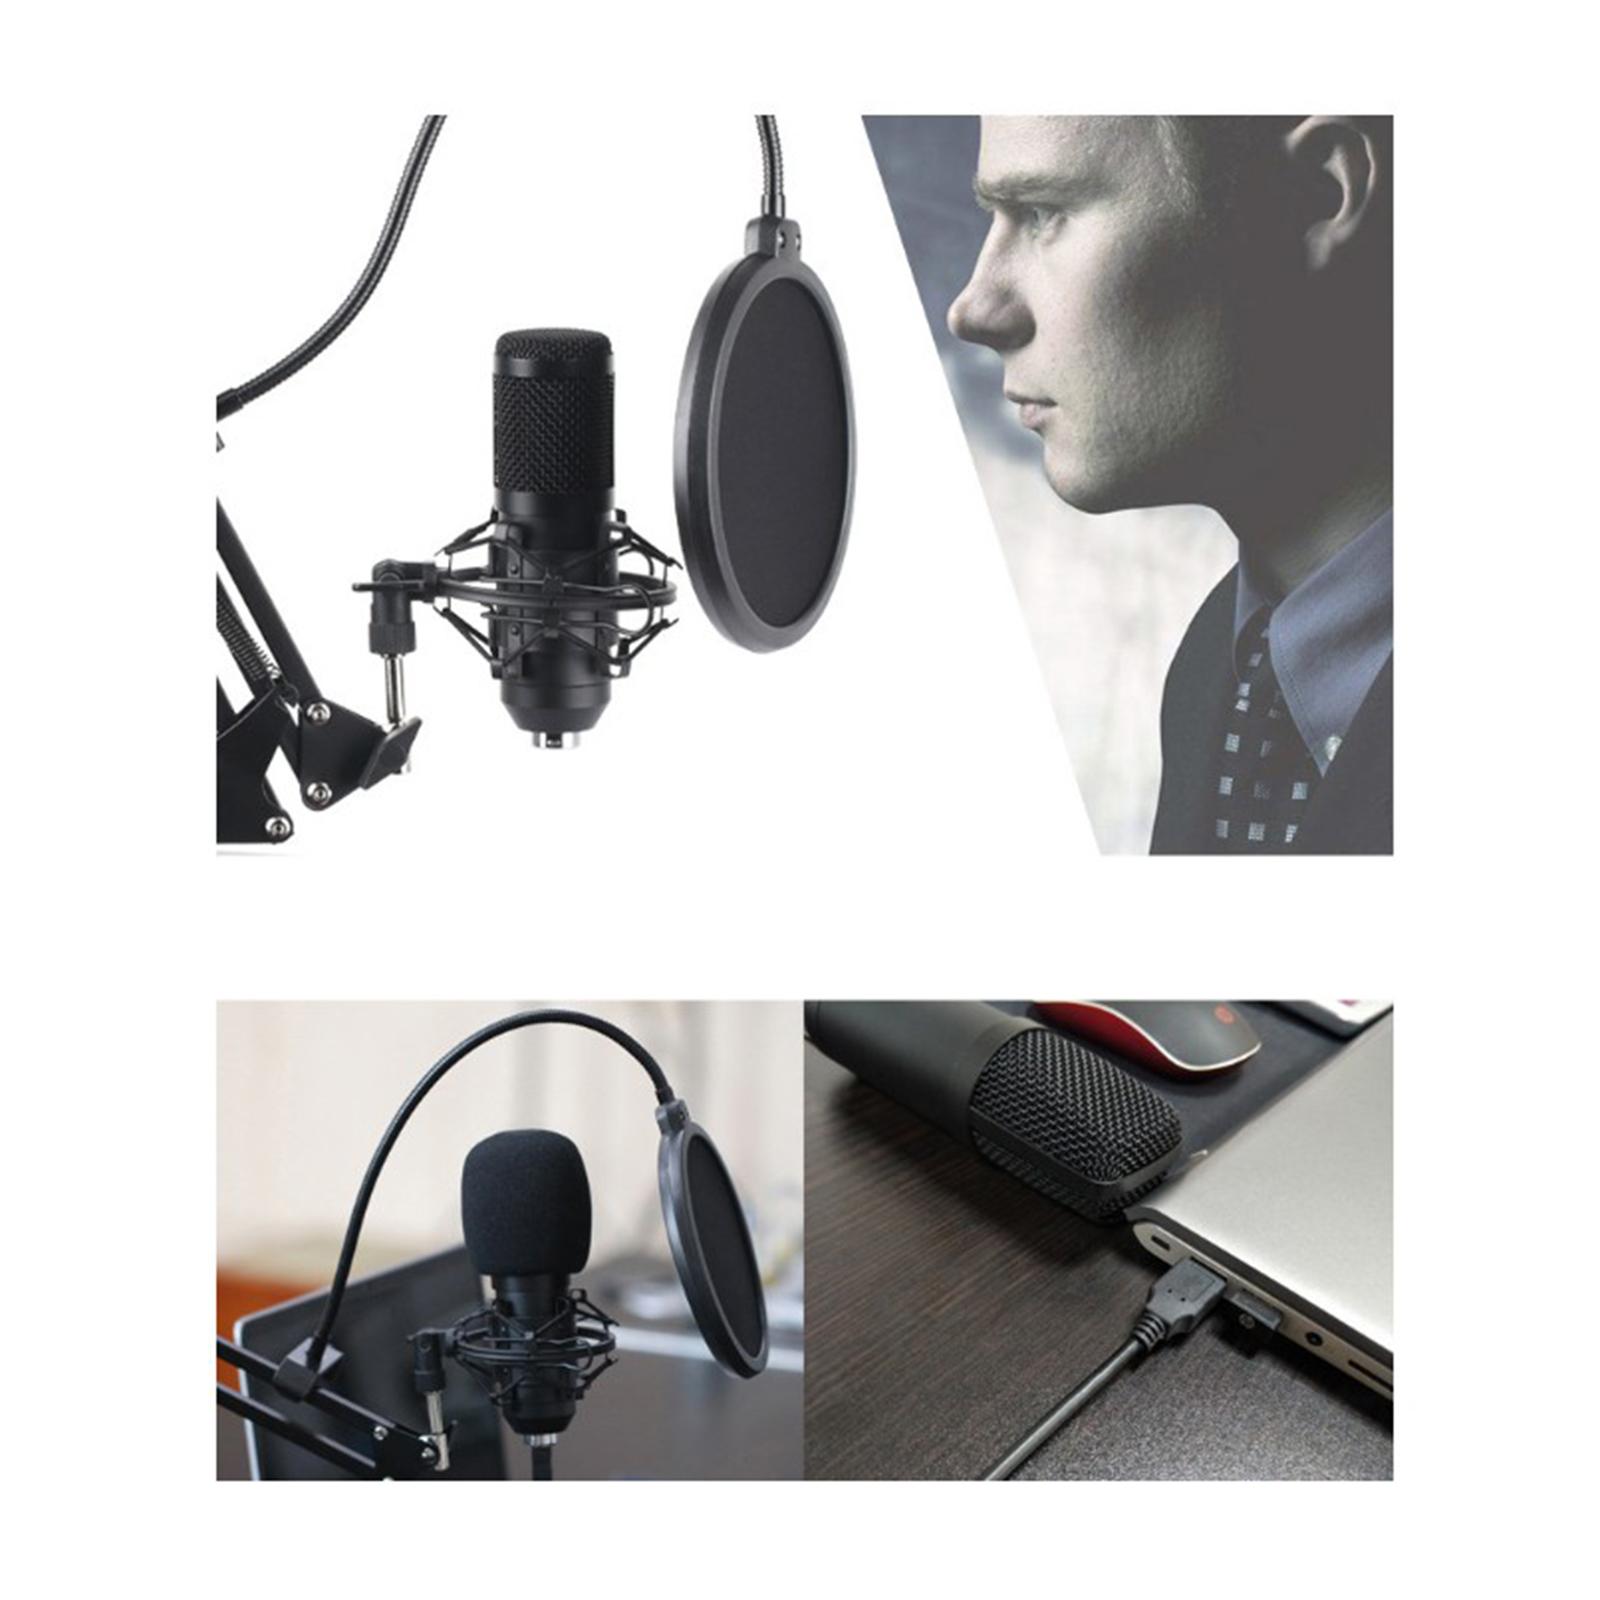 USB Microphone, Computer Condenser PC Gaming Mic with Shock Mount & Filter for Streaming, Recording, Compatible with Laptop Desktop Computer